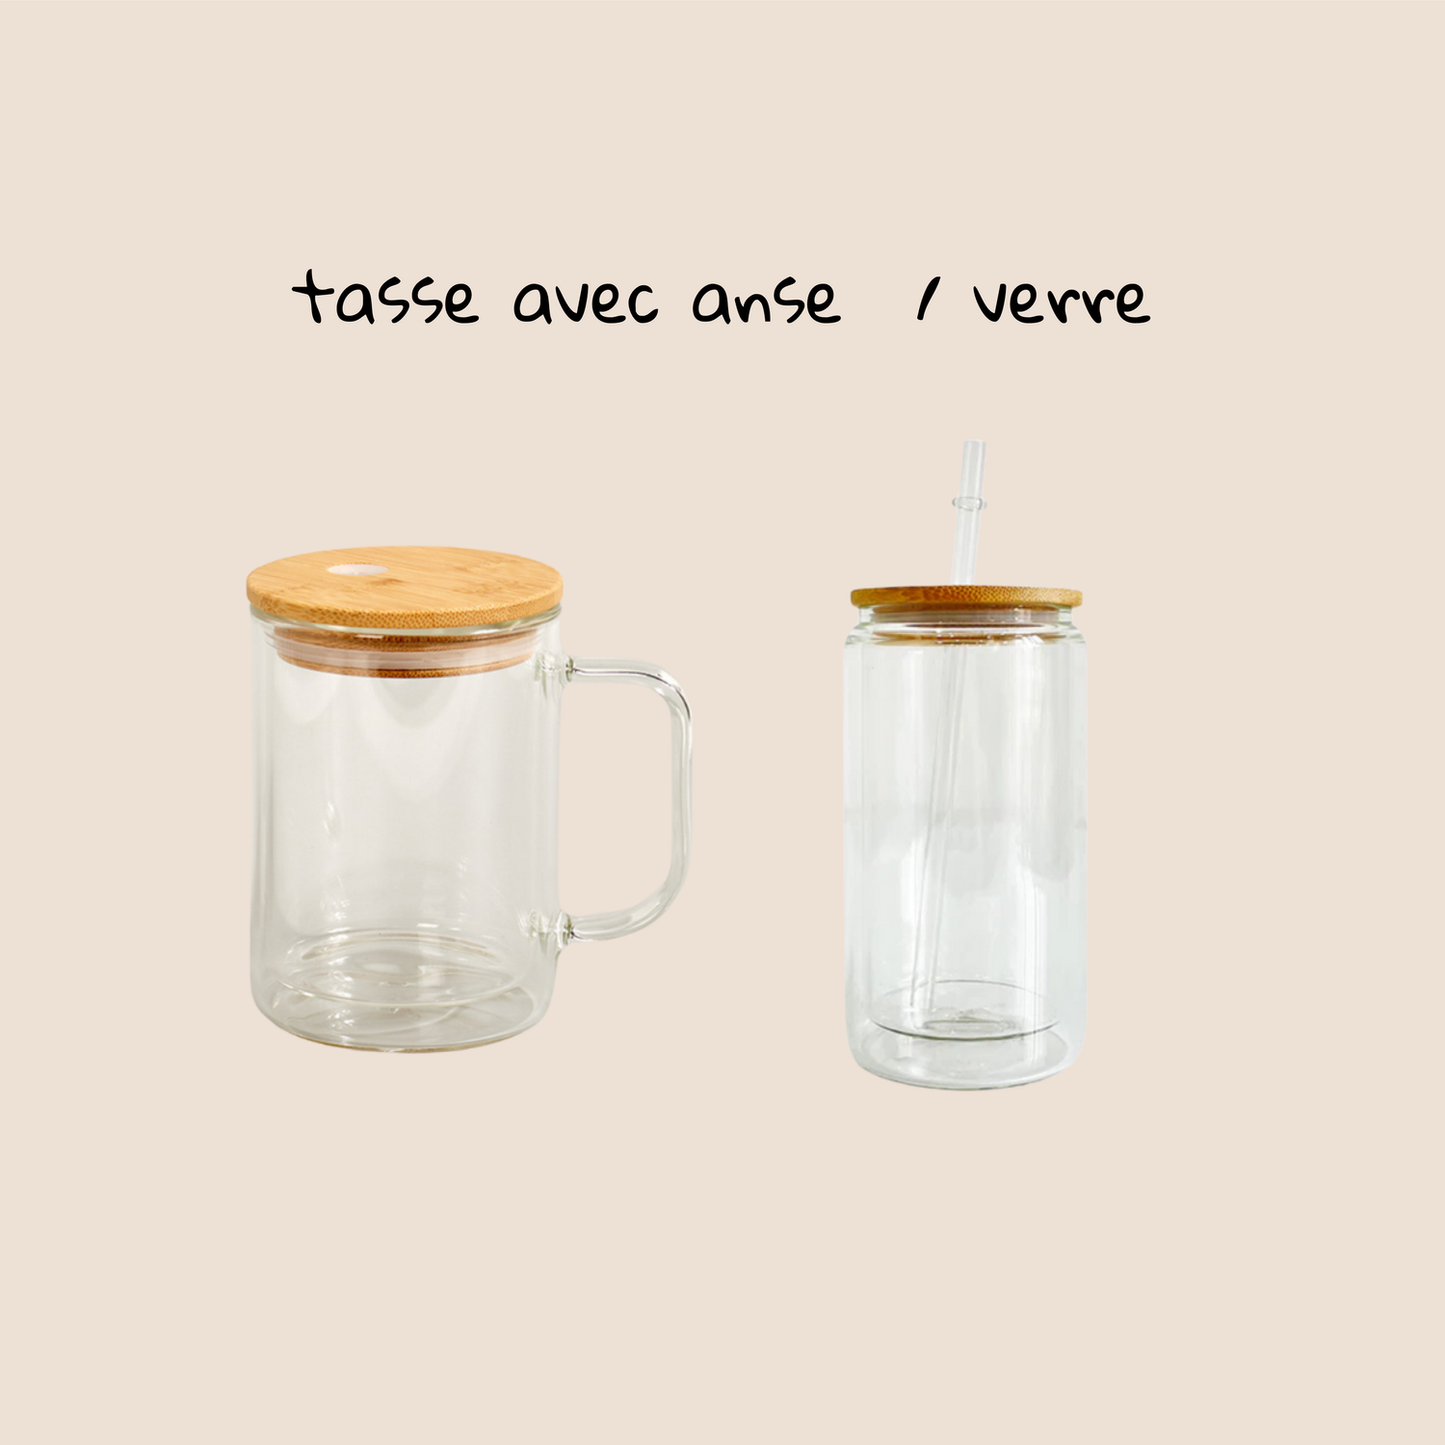 Verre - It’s ok to have a bad day